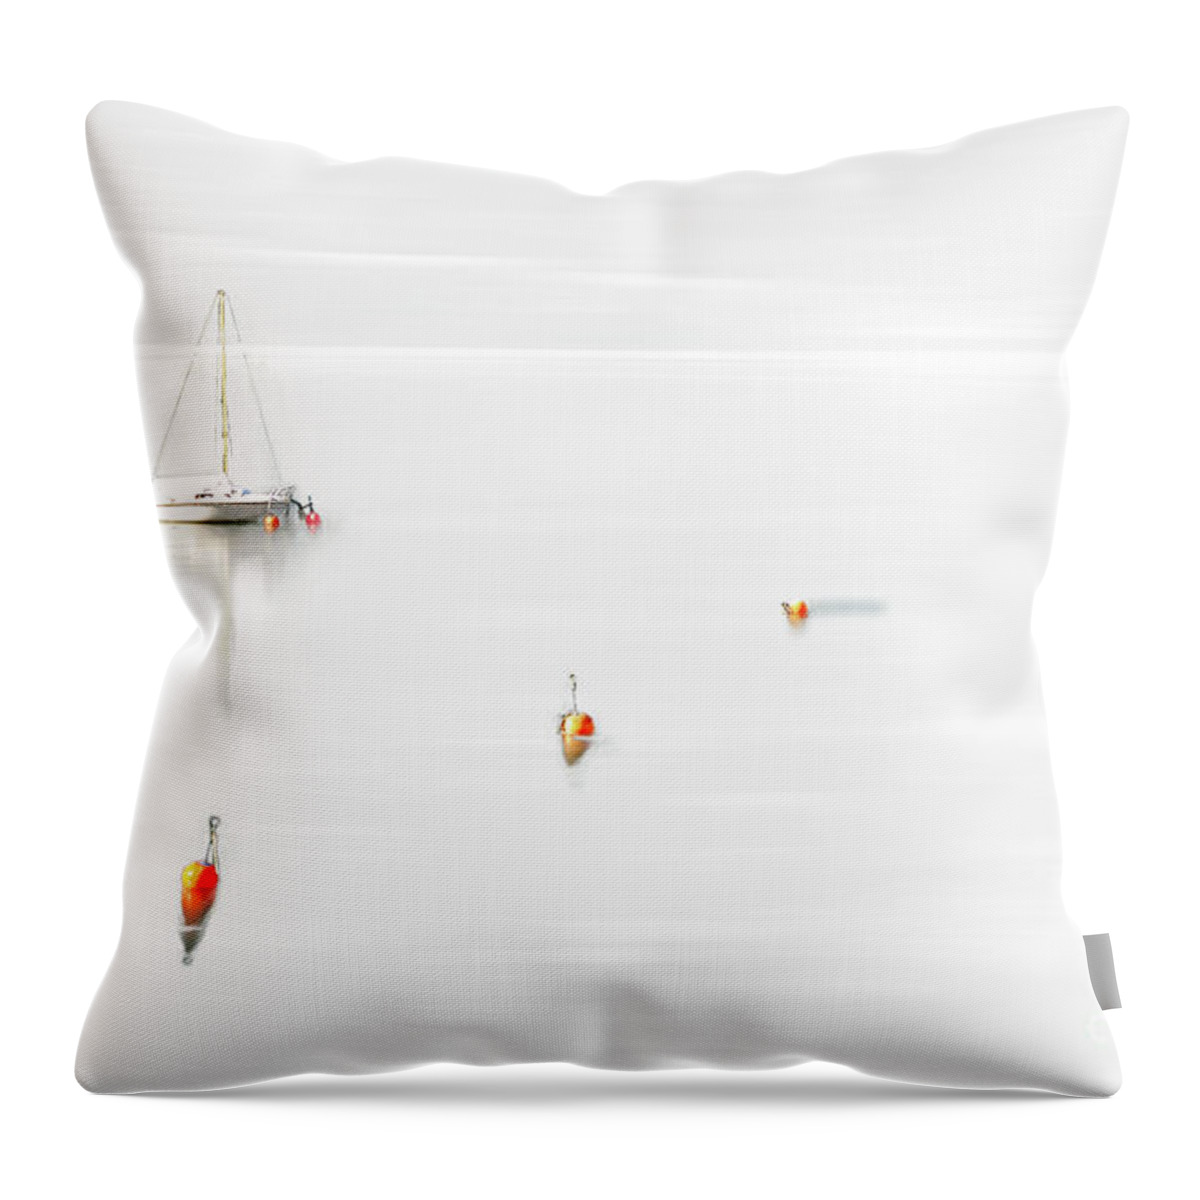 Sailing Throw Pillow featuring the photograph Silent Sailing by Hannes Cmarits